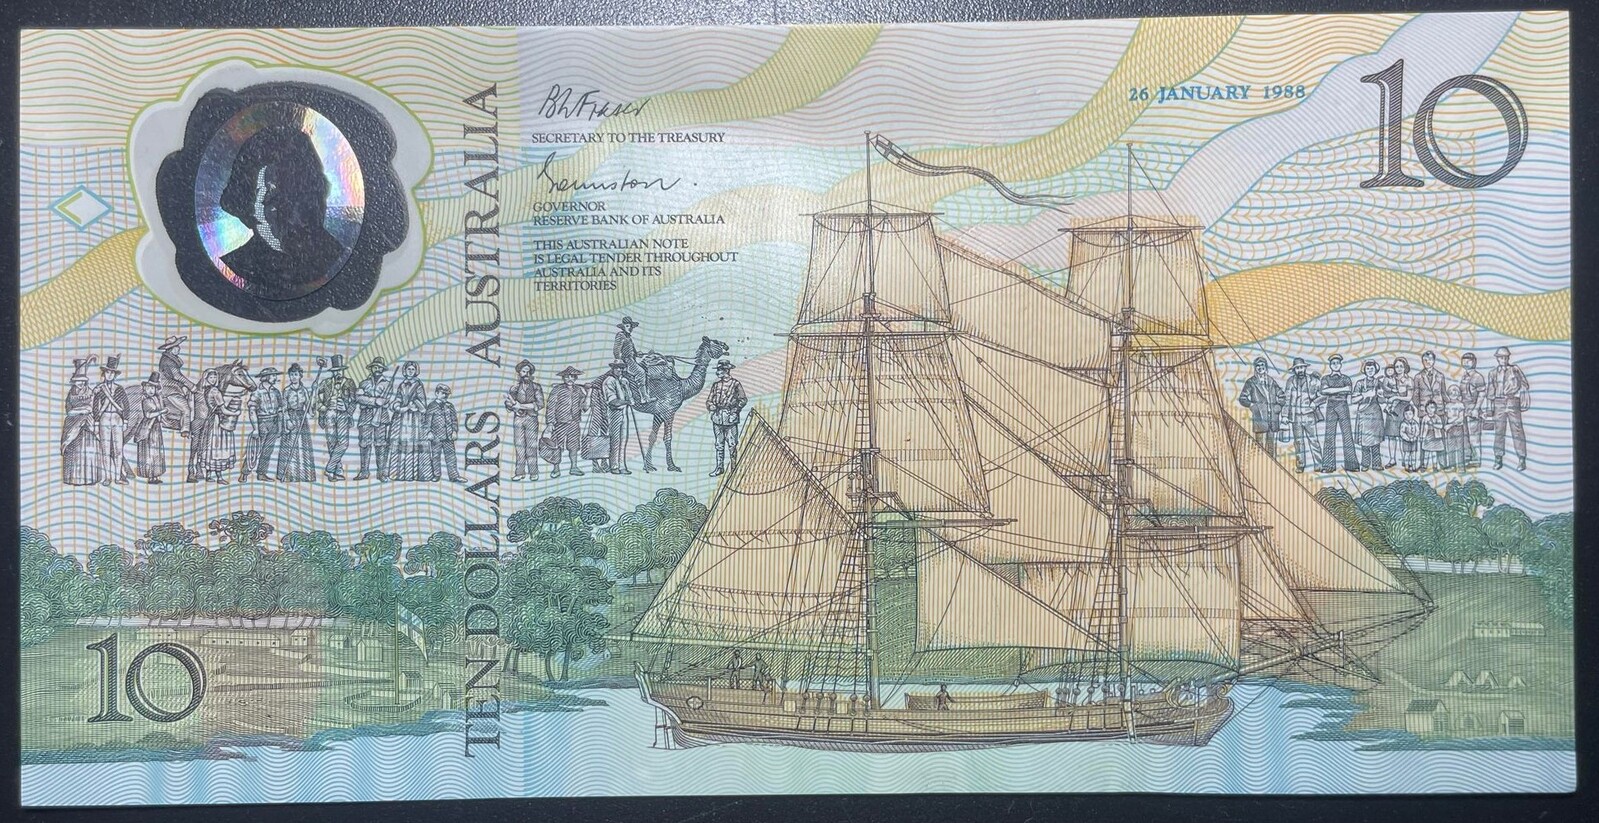 1988 $10 Bicentenary AA11 NPA Blue Folder Collectors Issue Banknote AUNC - No Packaging